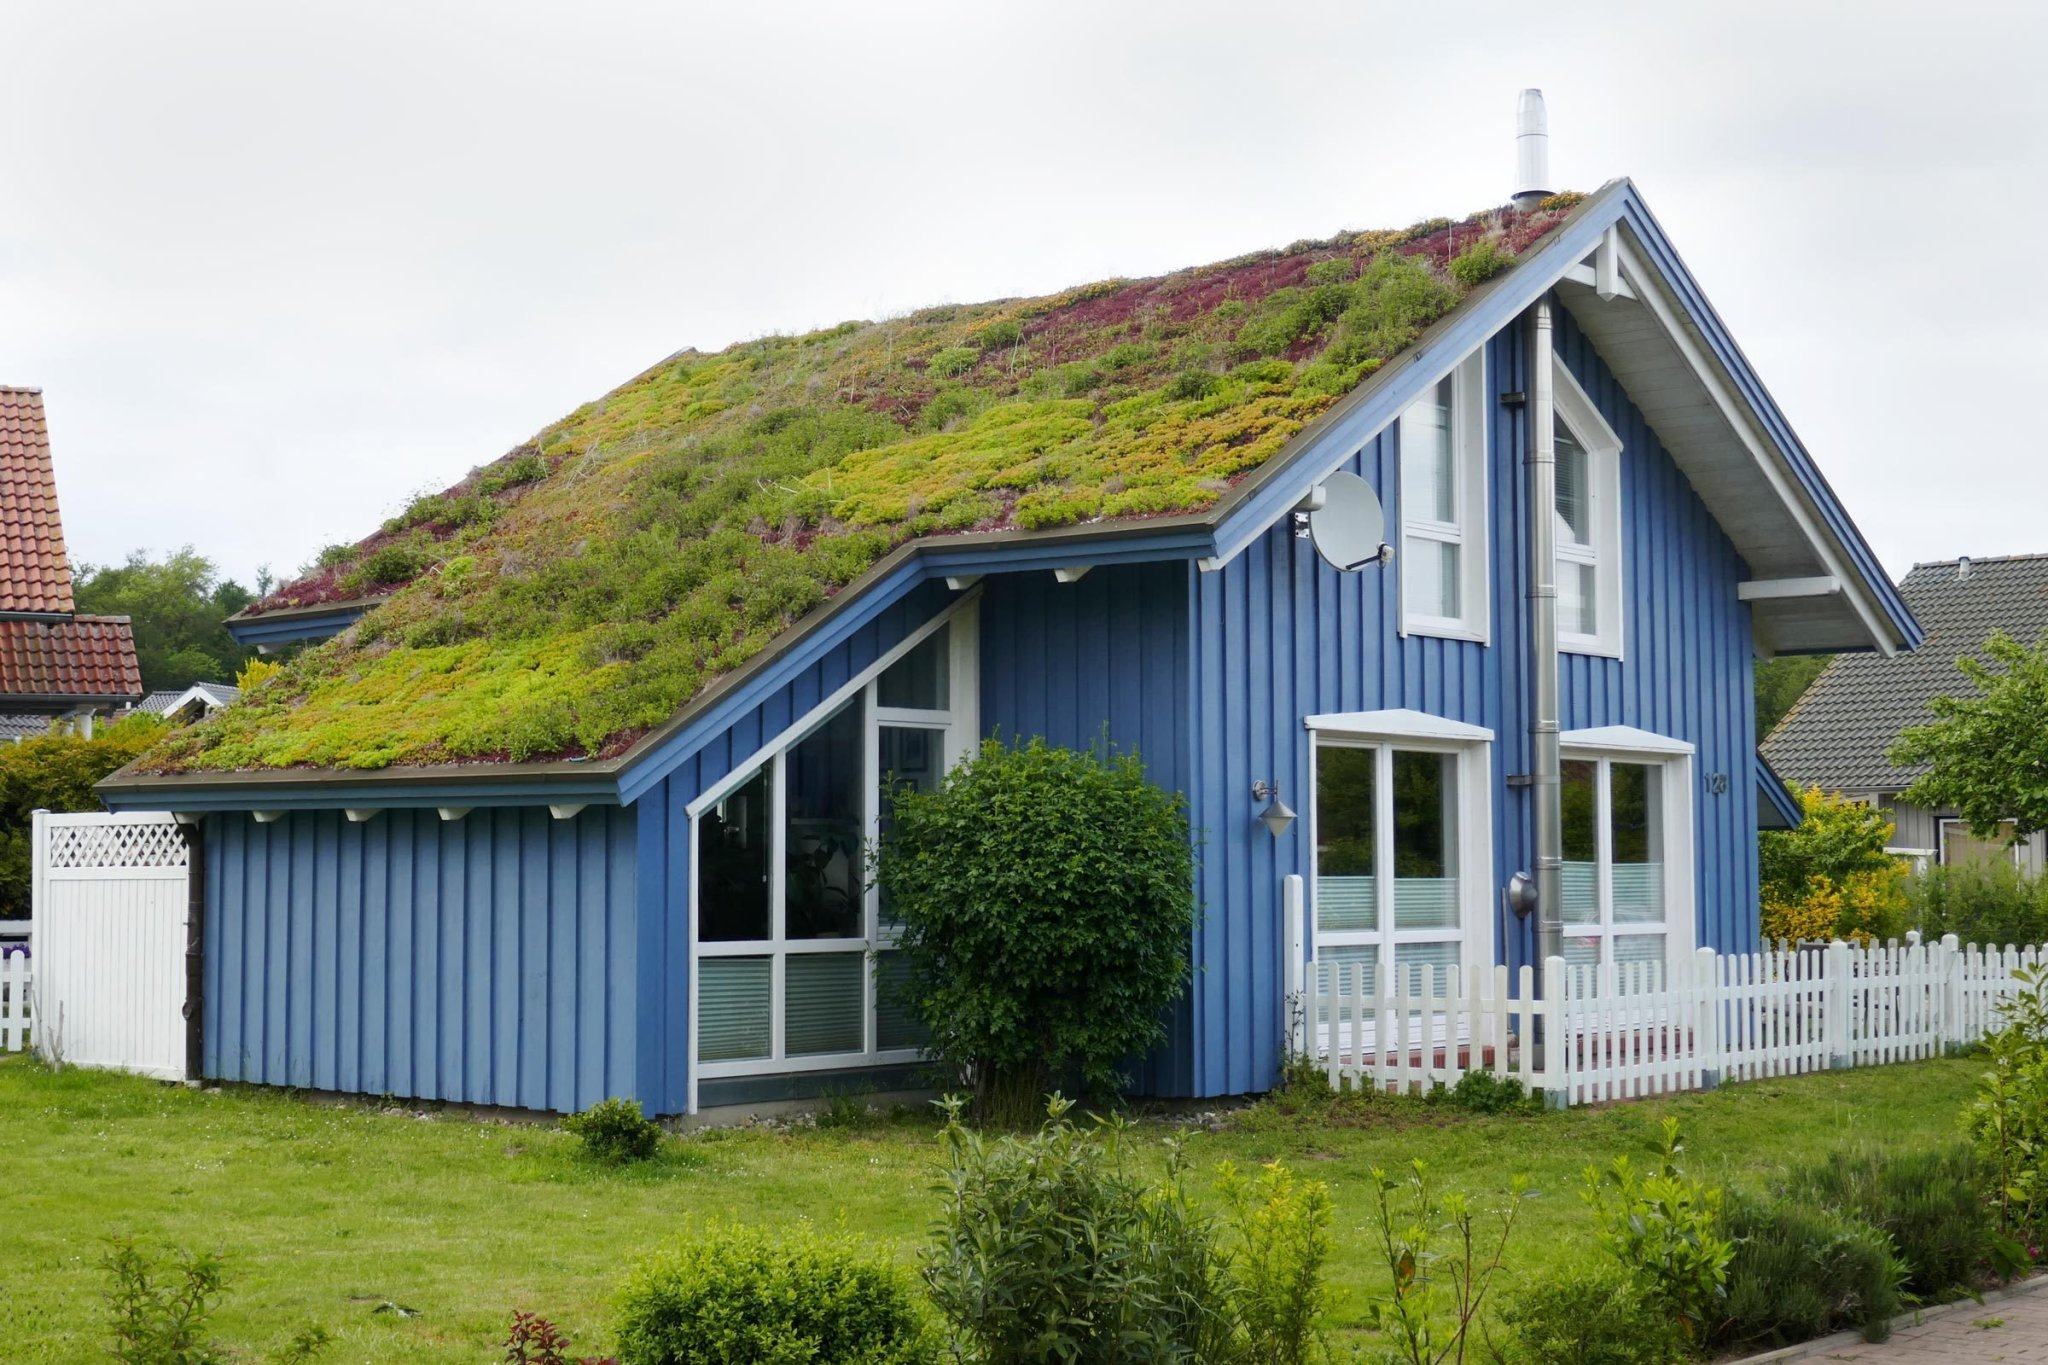 What Is a Green Roof?